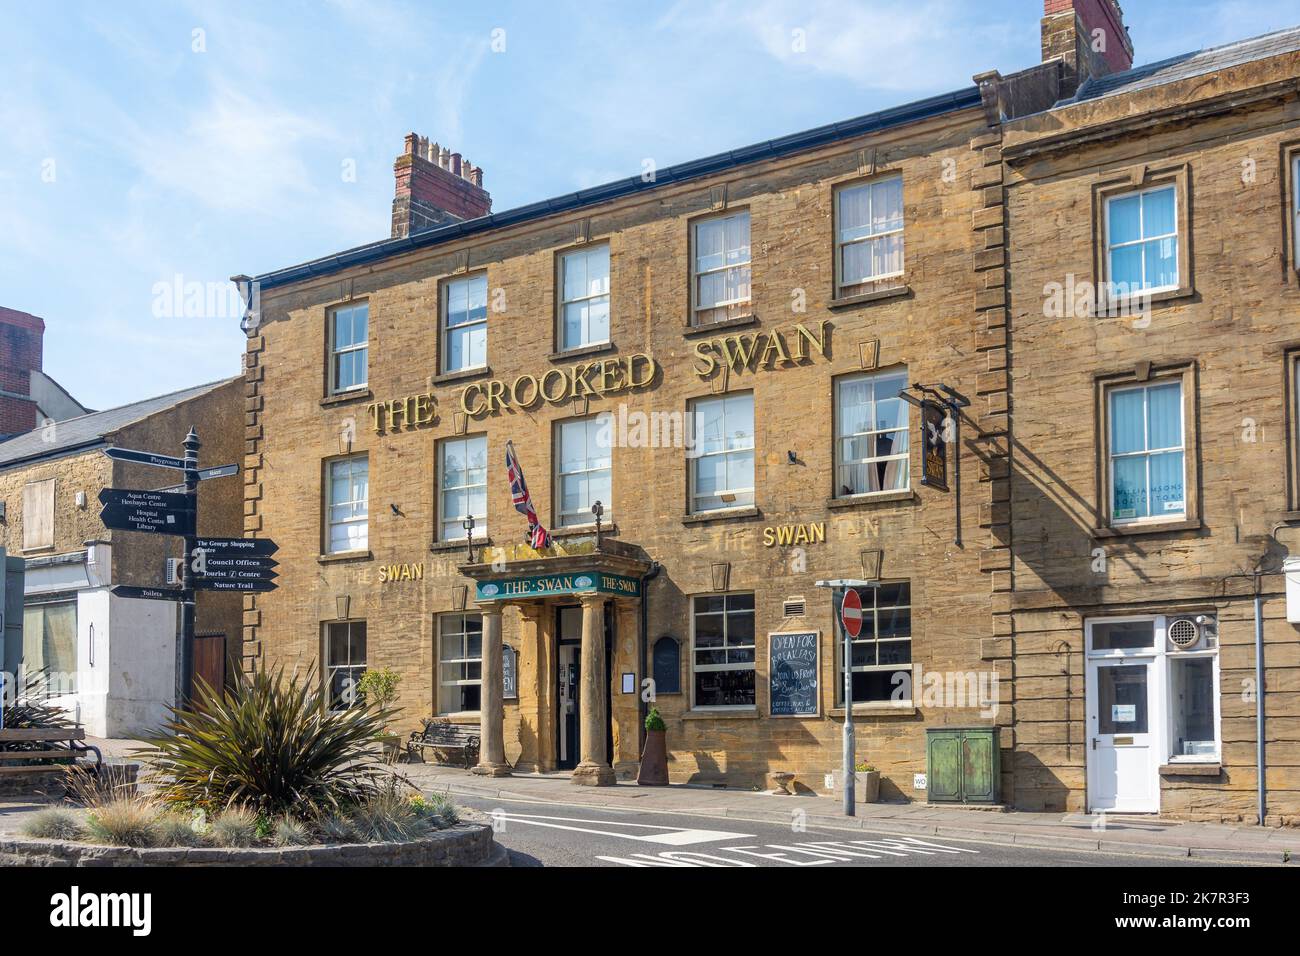 The Crooked Swan Hotel, Church Street, Crewkerne, Somerset, England, United Kingdom Stock Photo